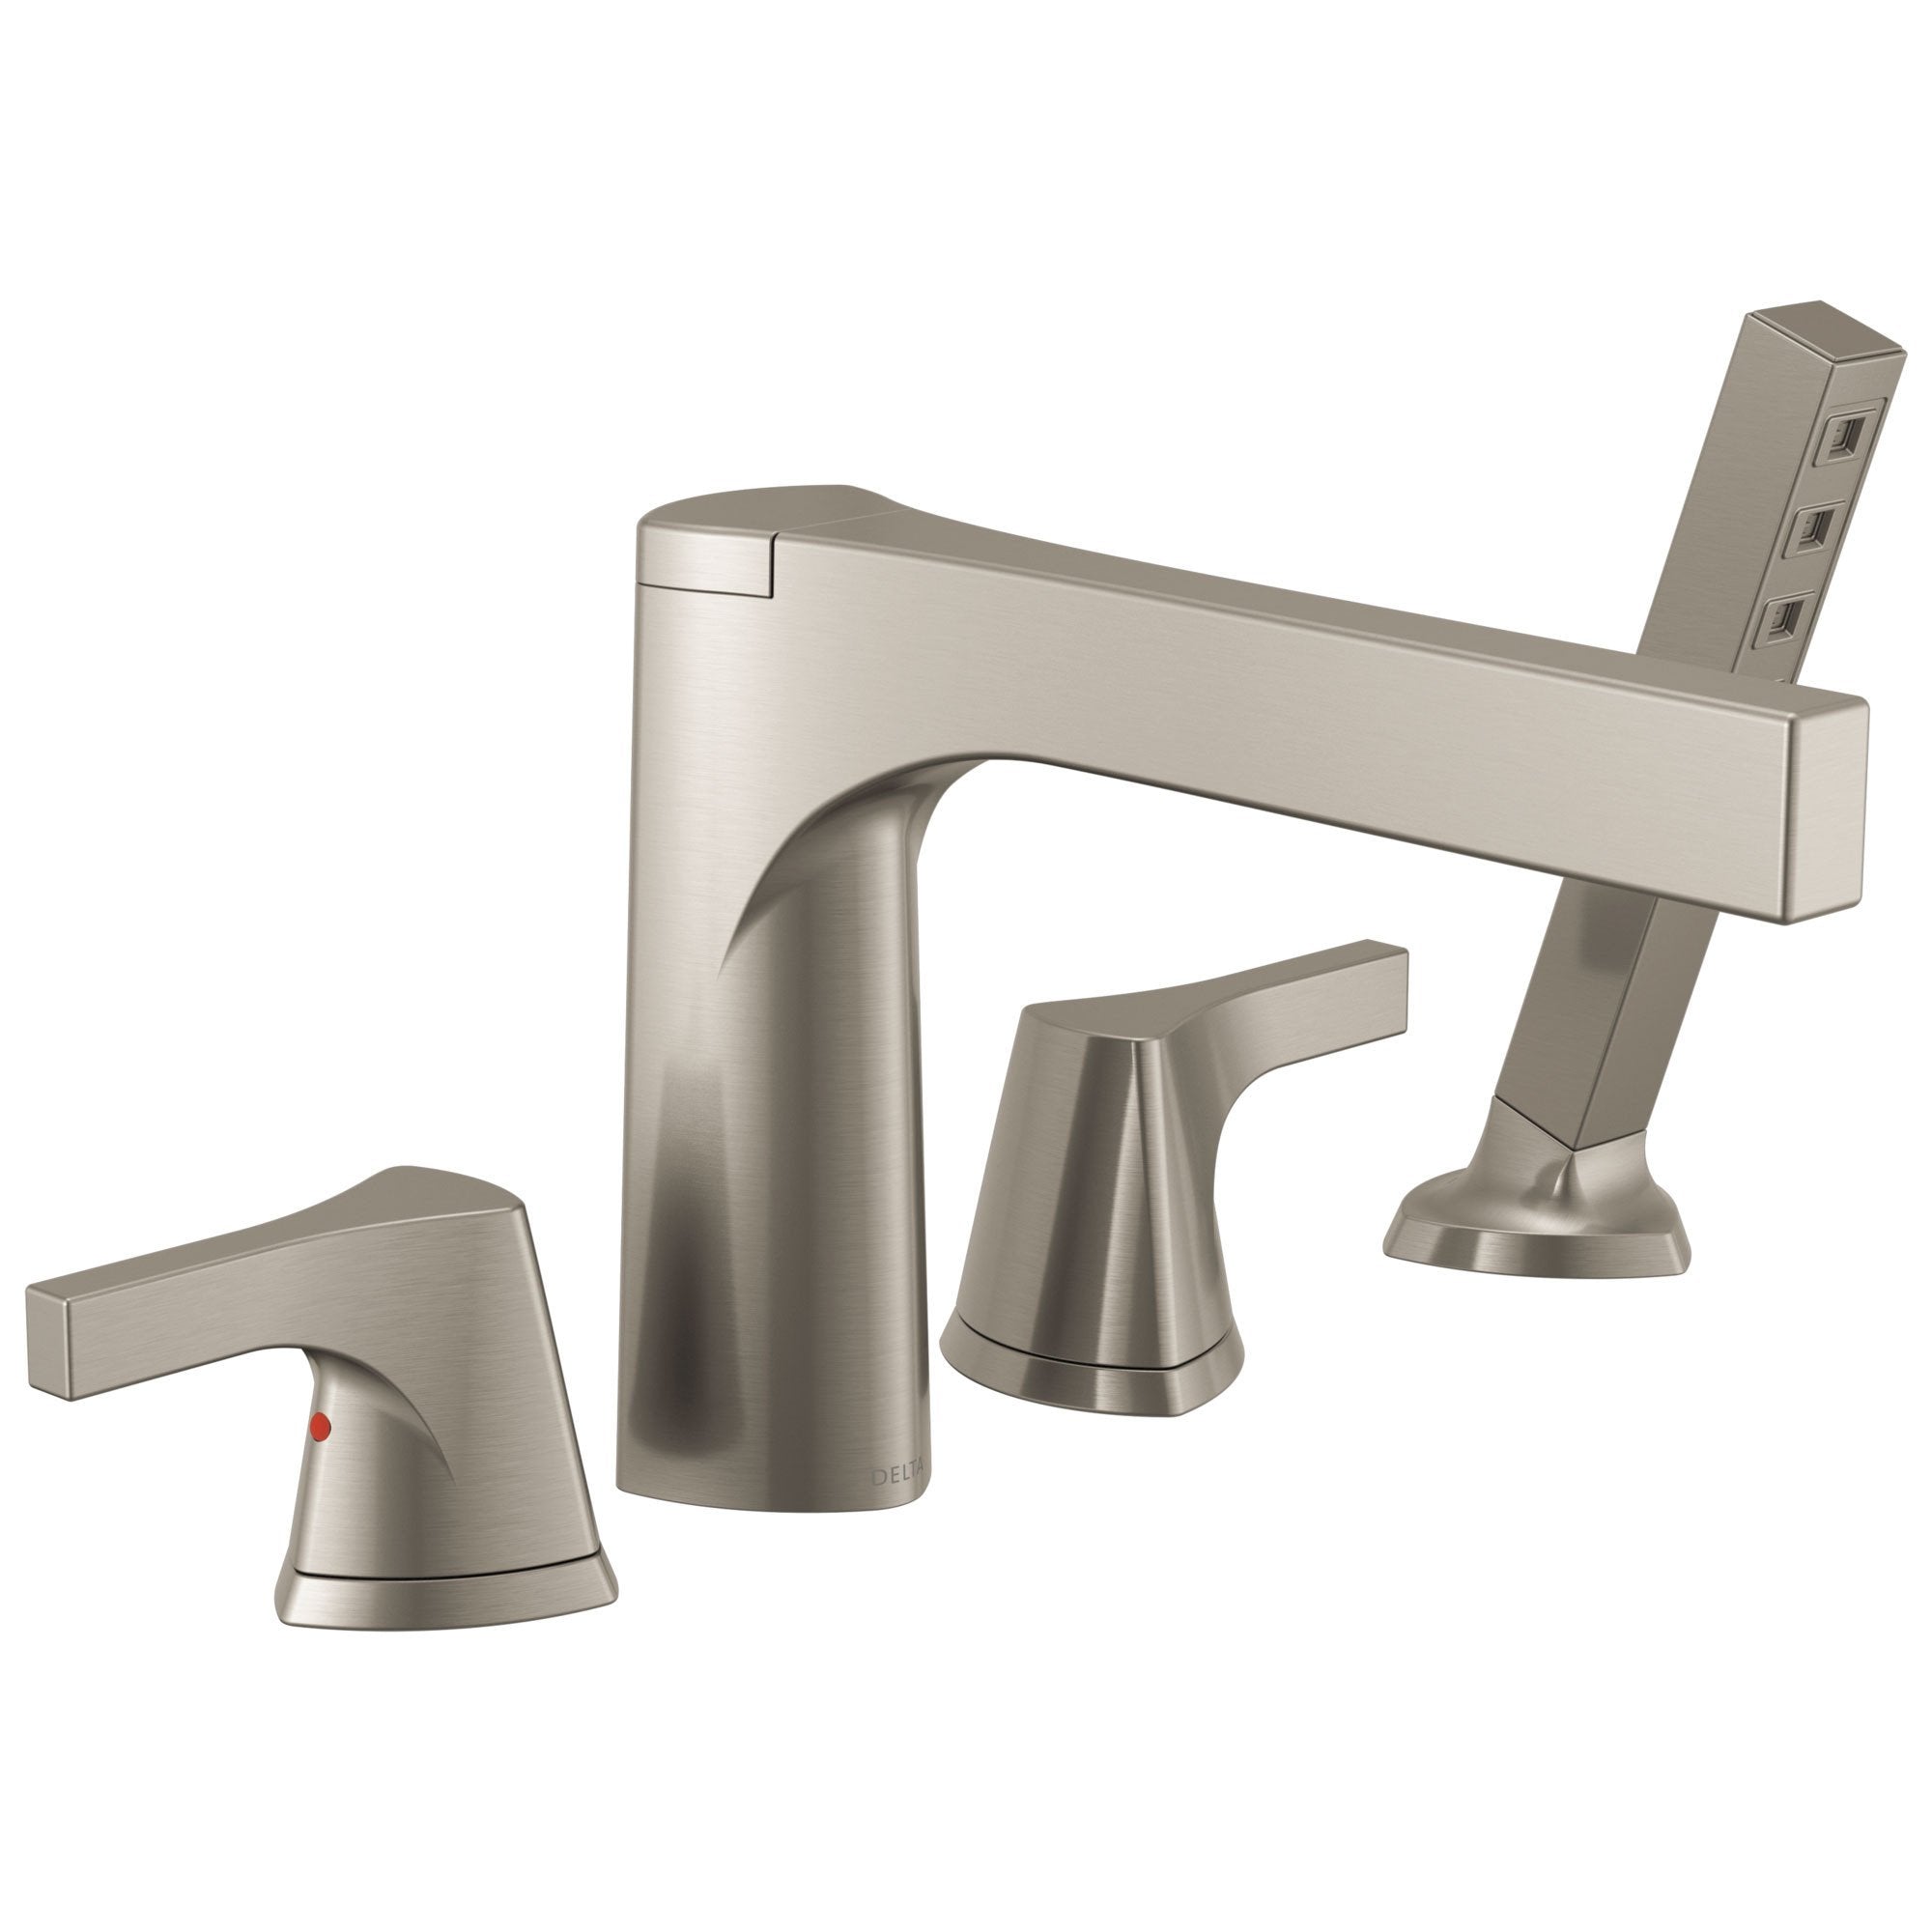 Delta Zura Collection Stainless Steel Finish 4-Hole Roman Tub Filler Faucet with Hand Shower Trim Kit (Rough in Valve Sold Separately) 743938